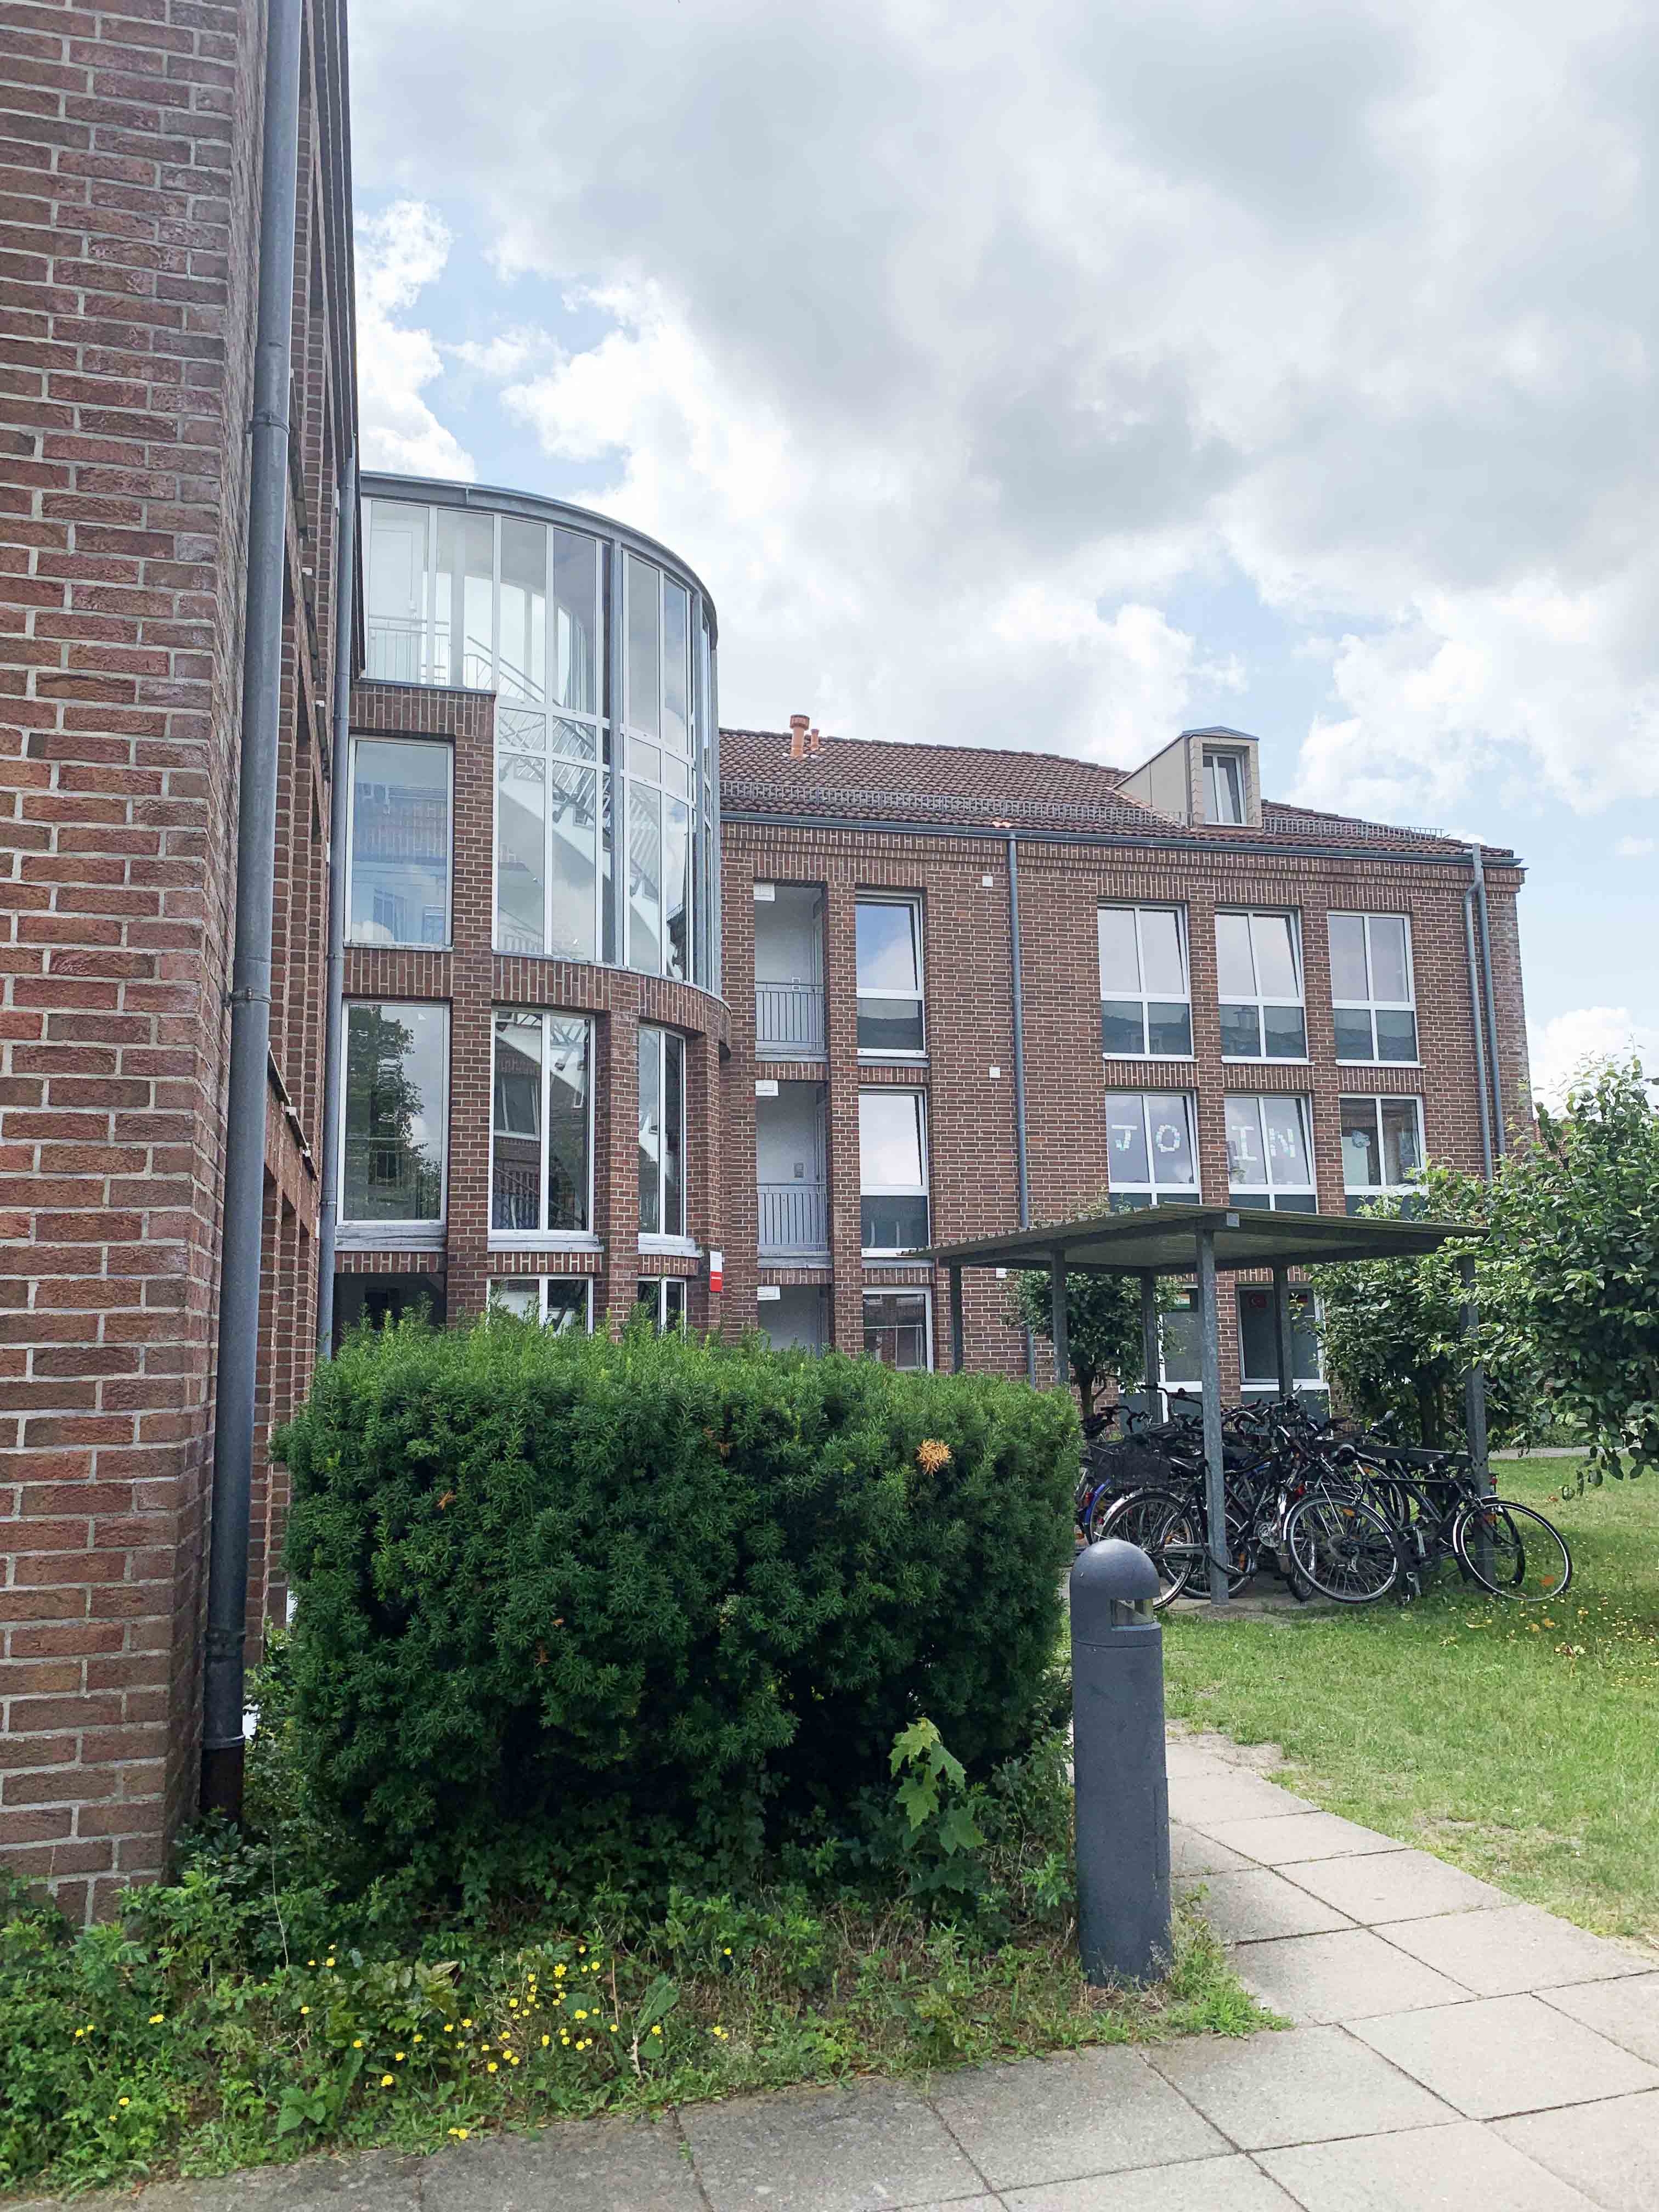 Exterior of student dorm in Luneburg, Germany.